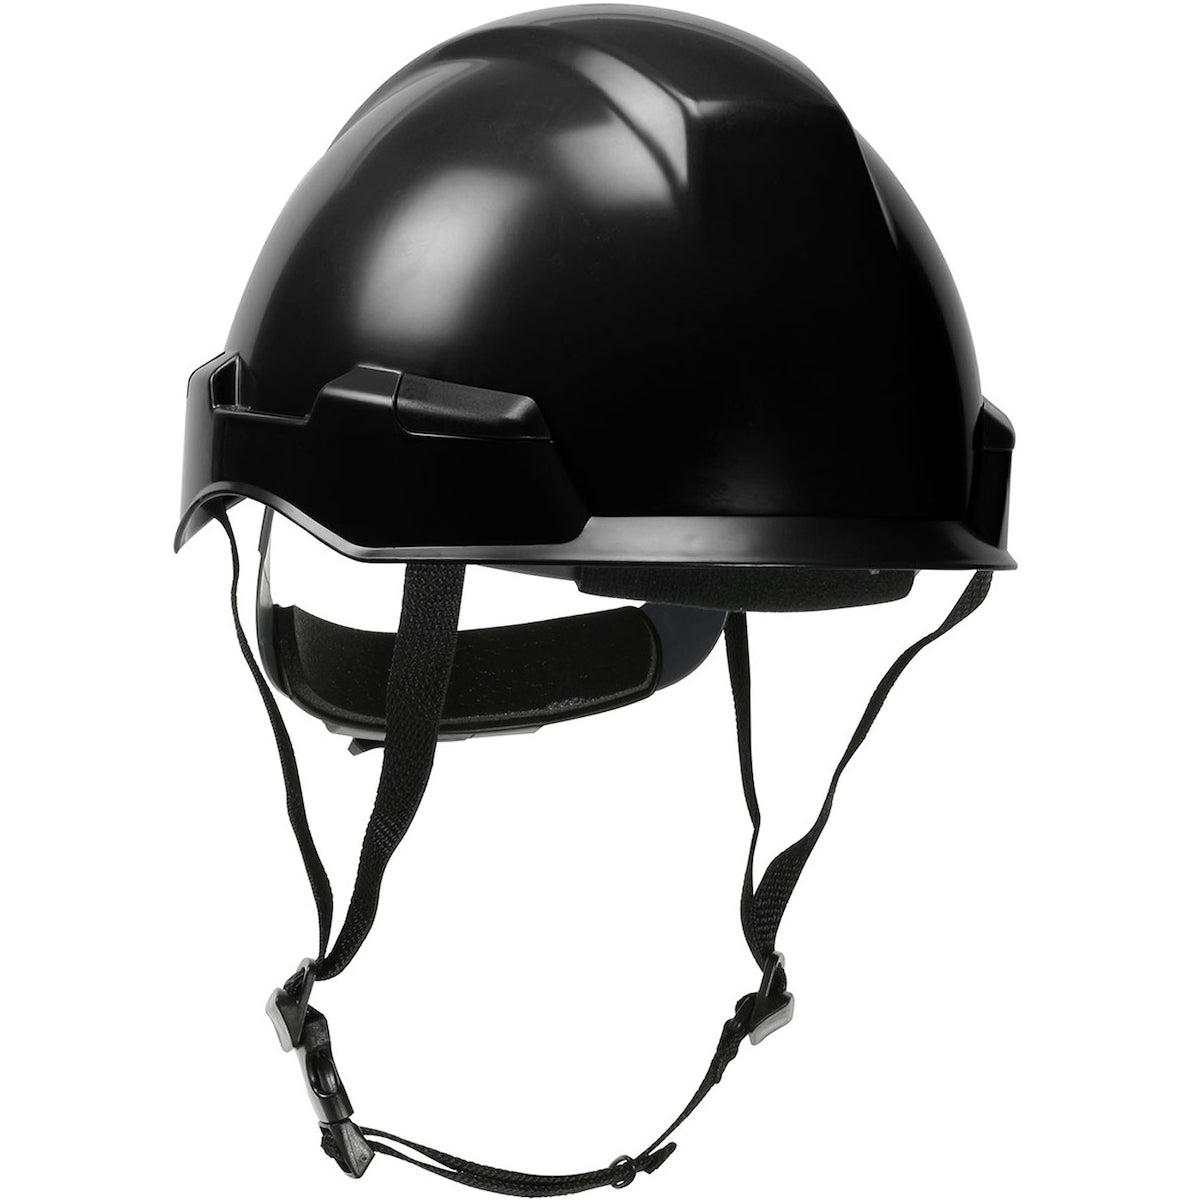 Rocky™ Industrial Climbing Helmet with Mips® Technology, Polycarbonate/ABS Shell, Hi-Density Foam Impact Liner, Nylon Suspension, Wheel Ratchet Adjustment and 4-Point Chin Strap